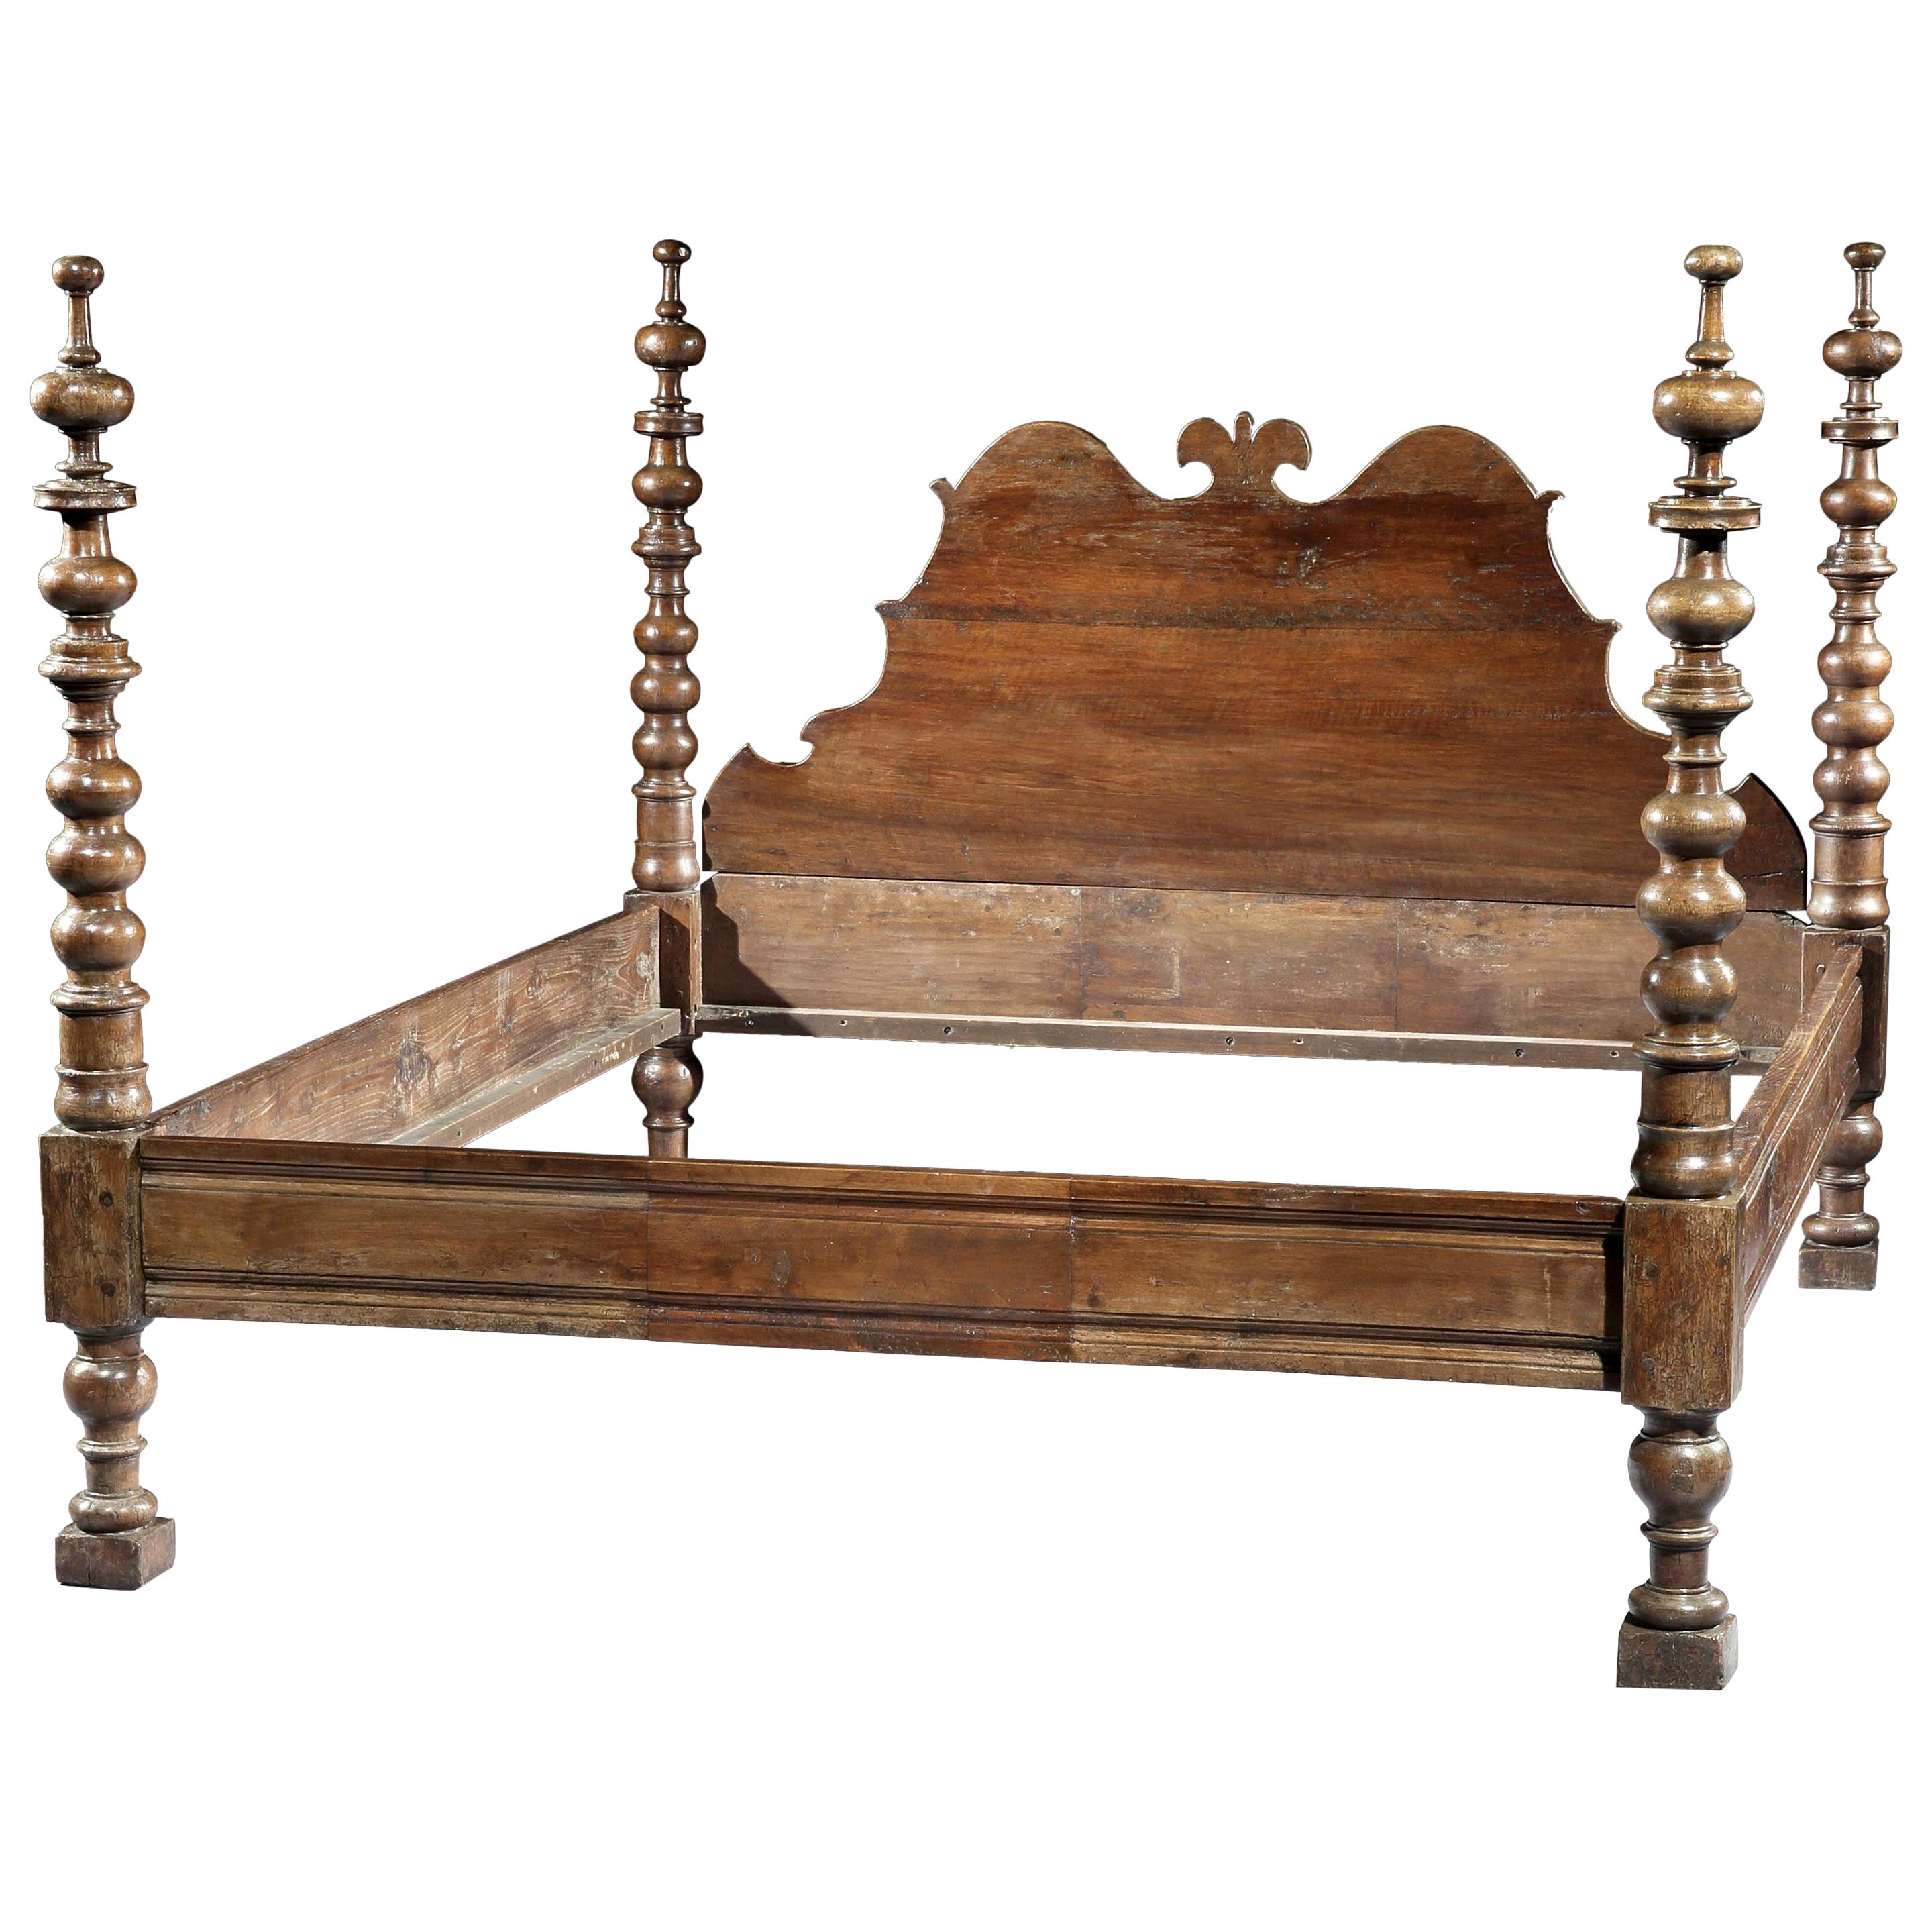 Bed, Tester, Double, 17th Century, Tuscan, Baroque, Walnut, Turned